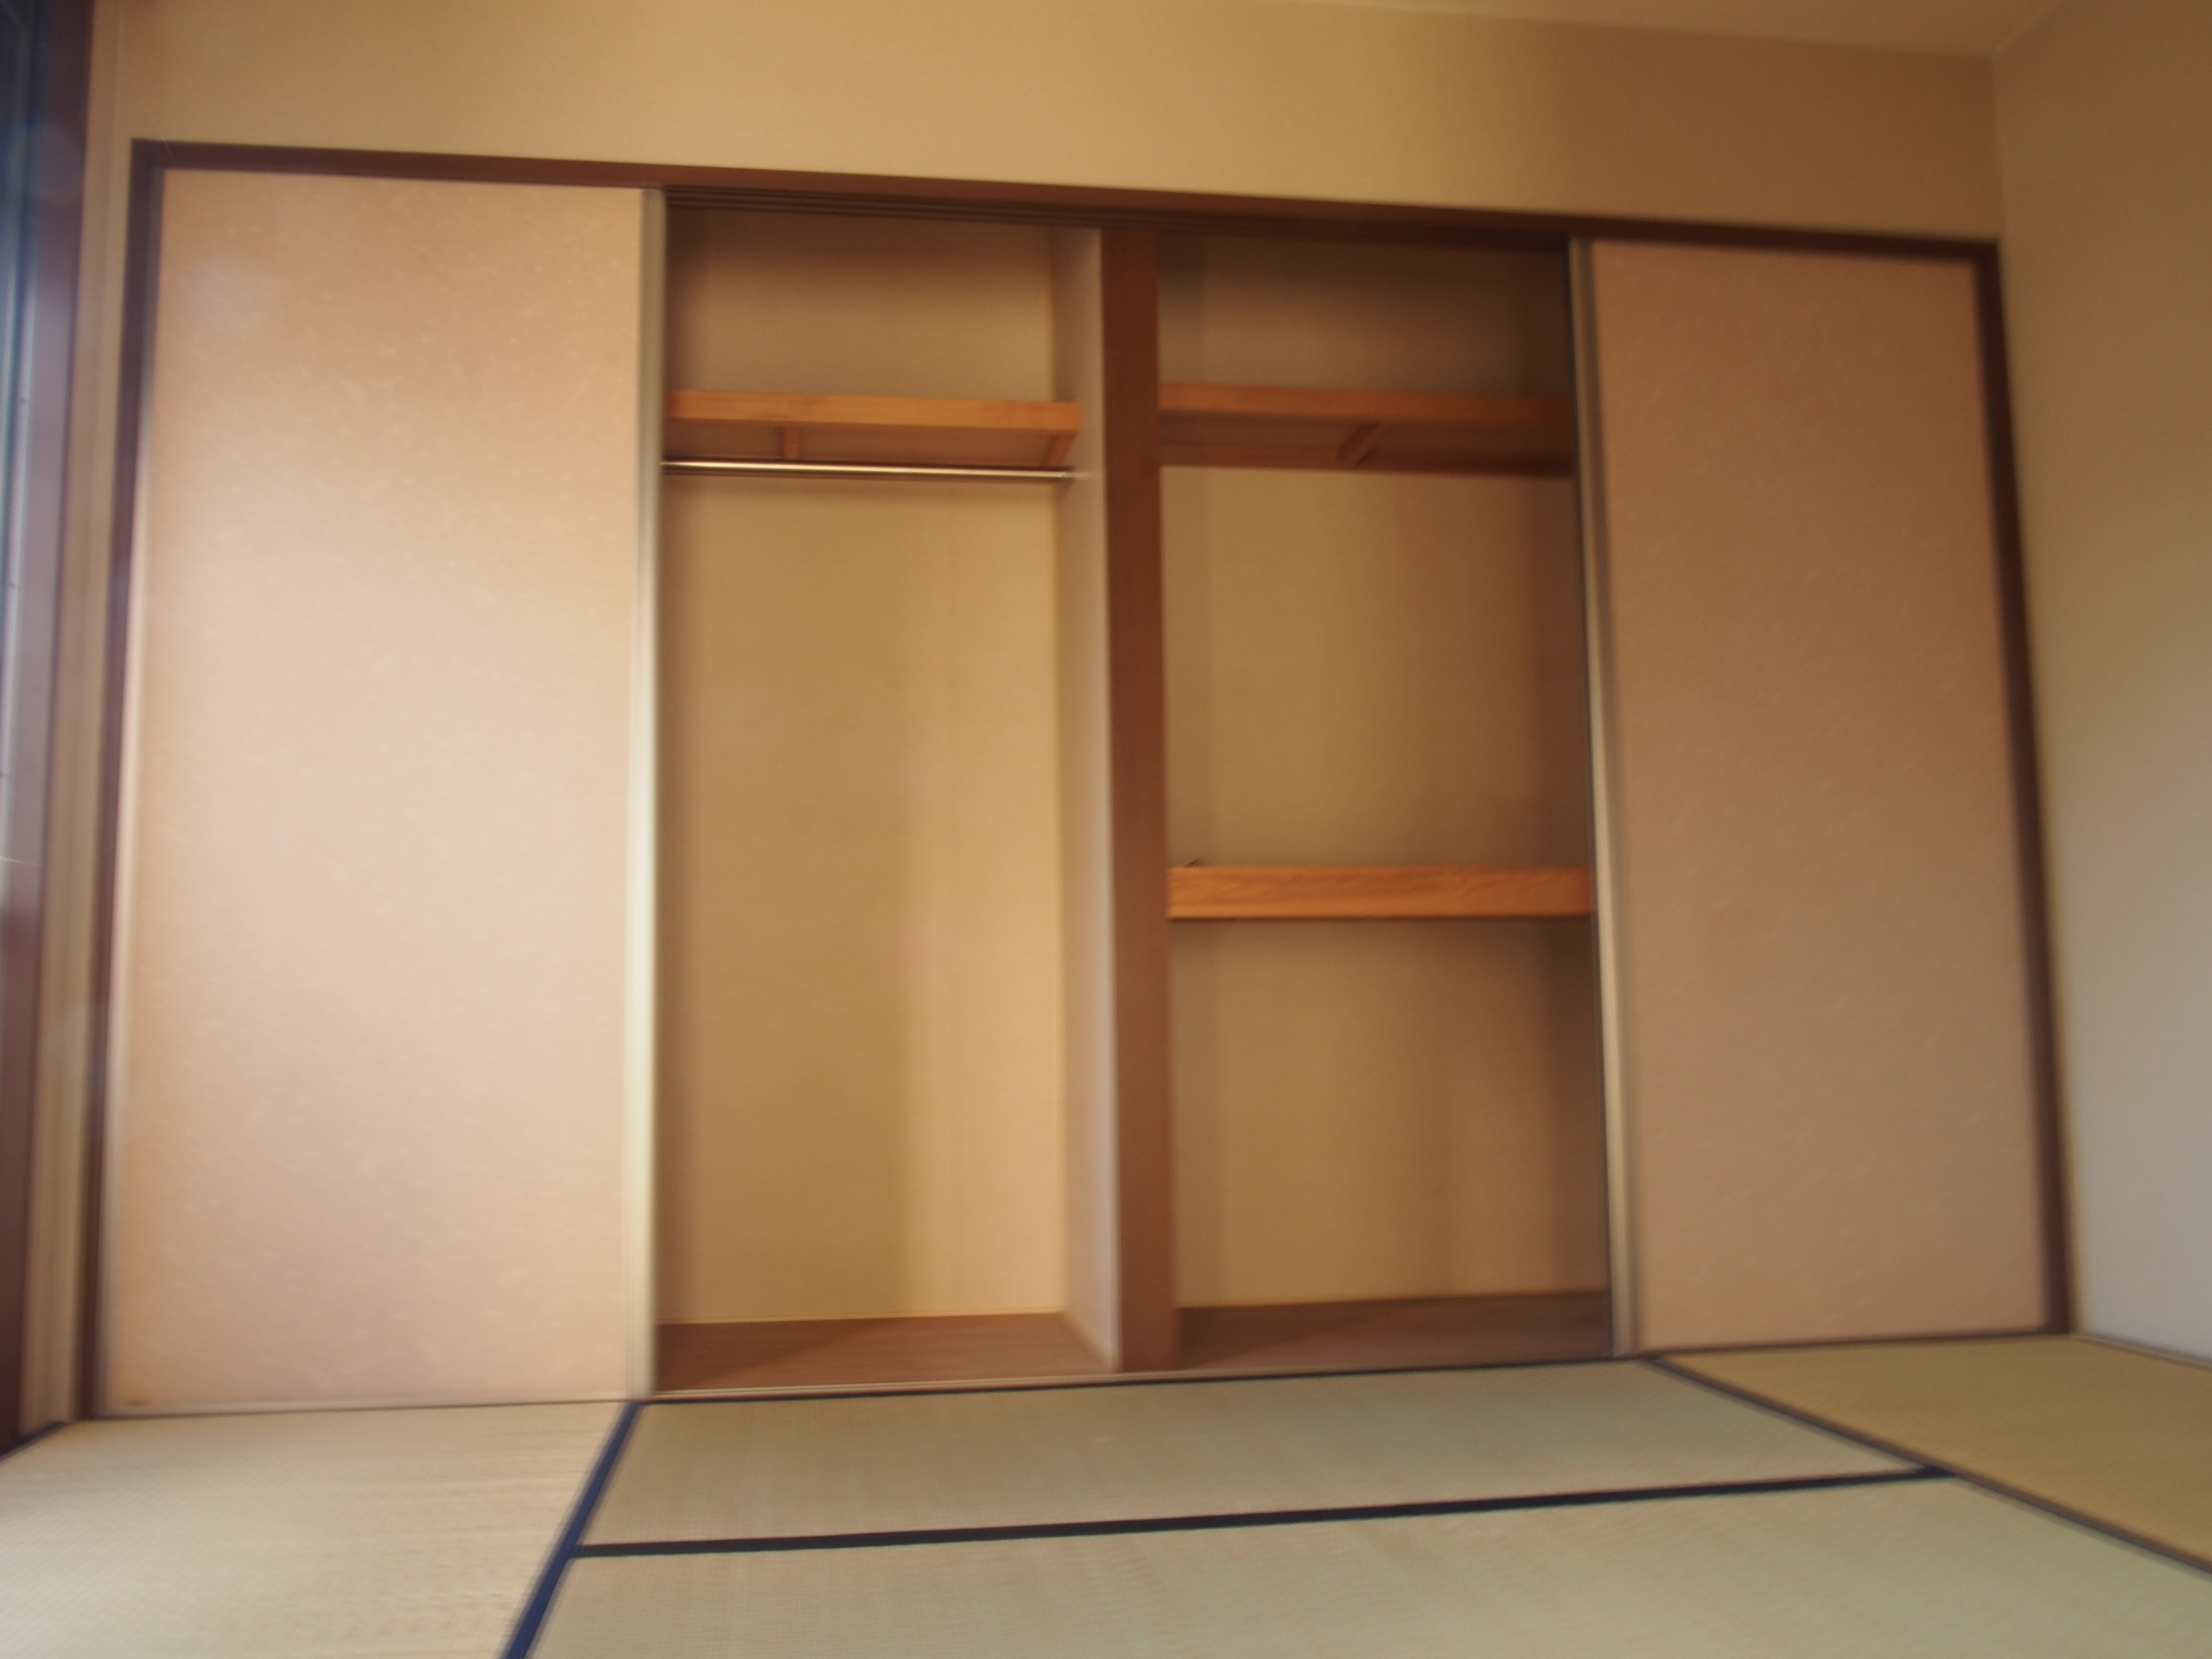 Receipt. Large storage of Japanese-style room. Convenient with a hanger pipe.